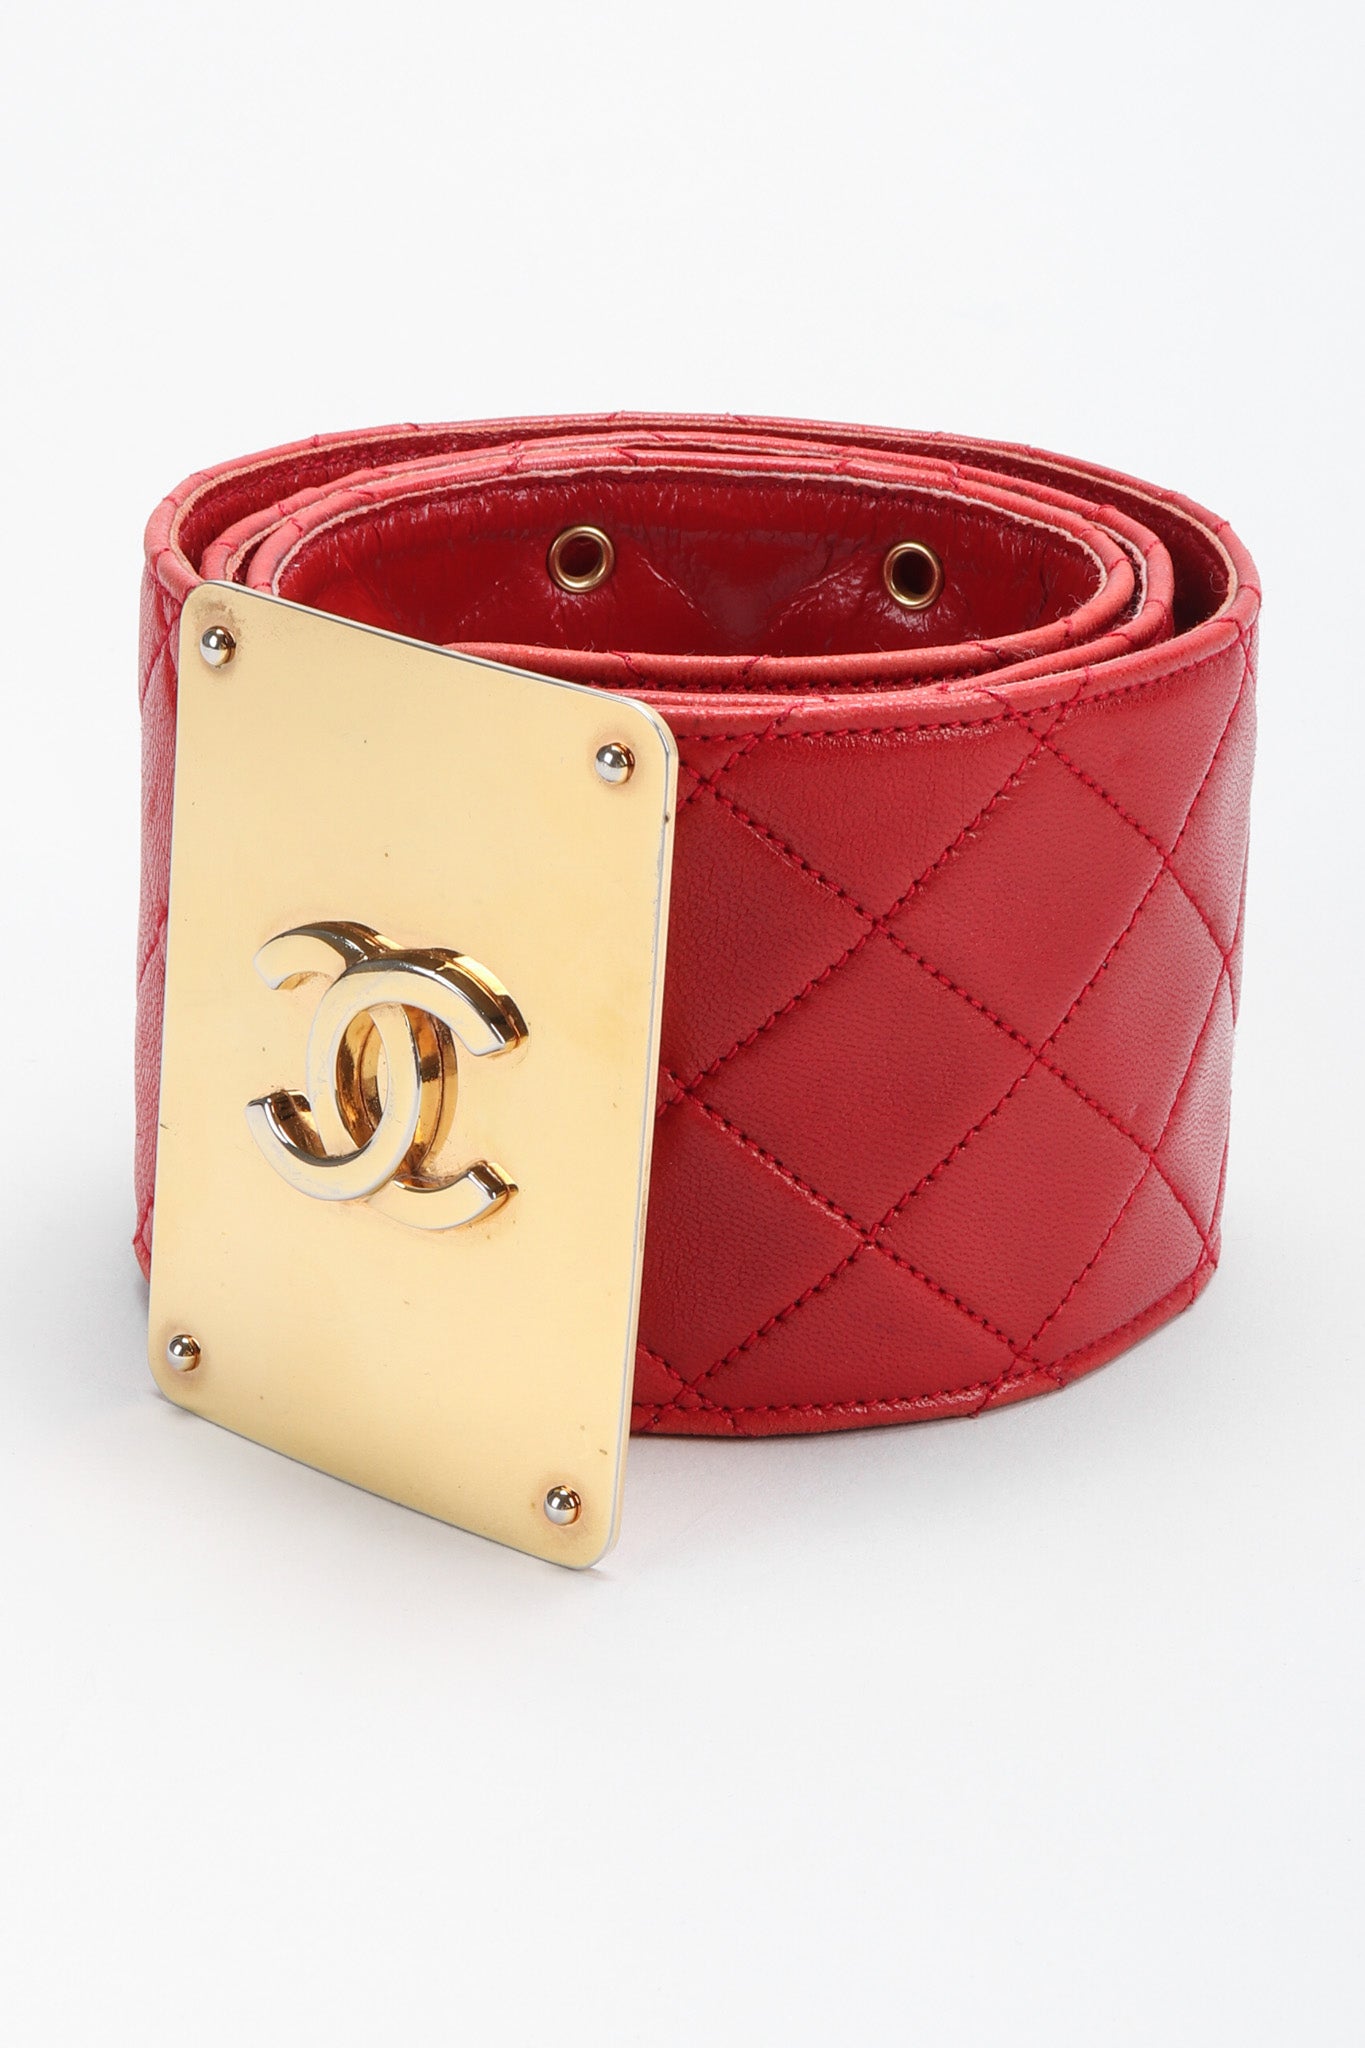 Recess Los Angeles Vintage Chanel Quilted CC Buckle Belt